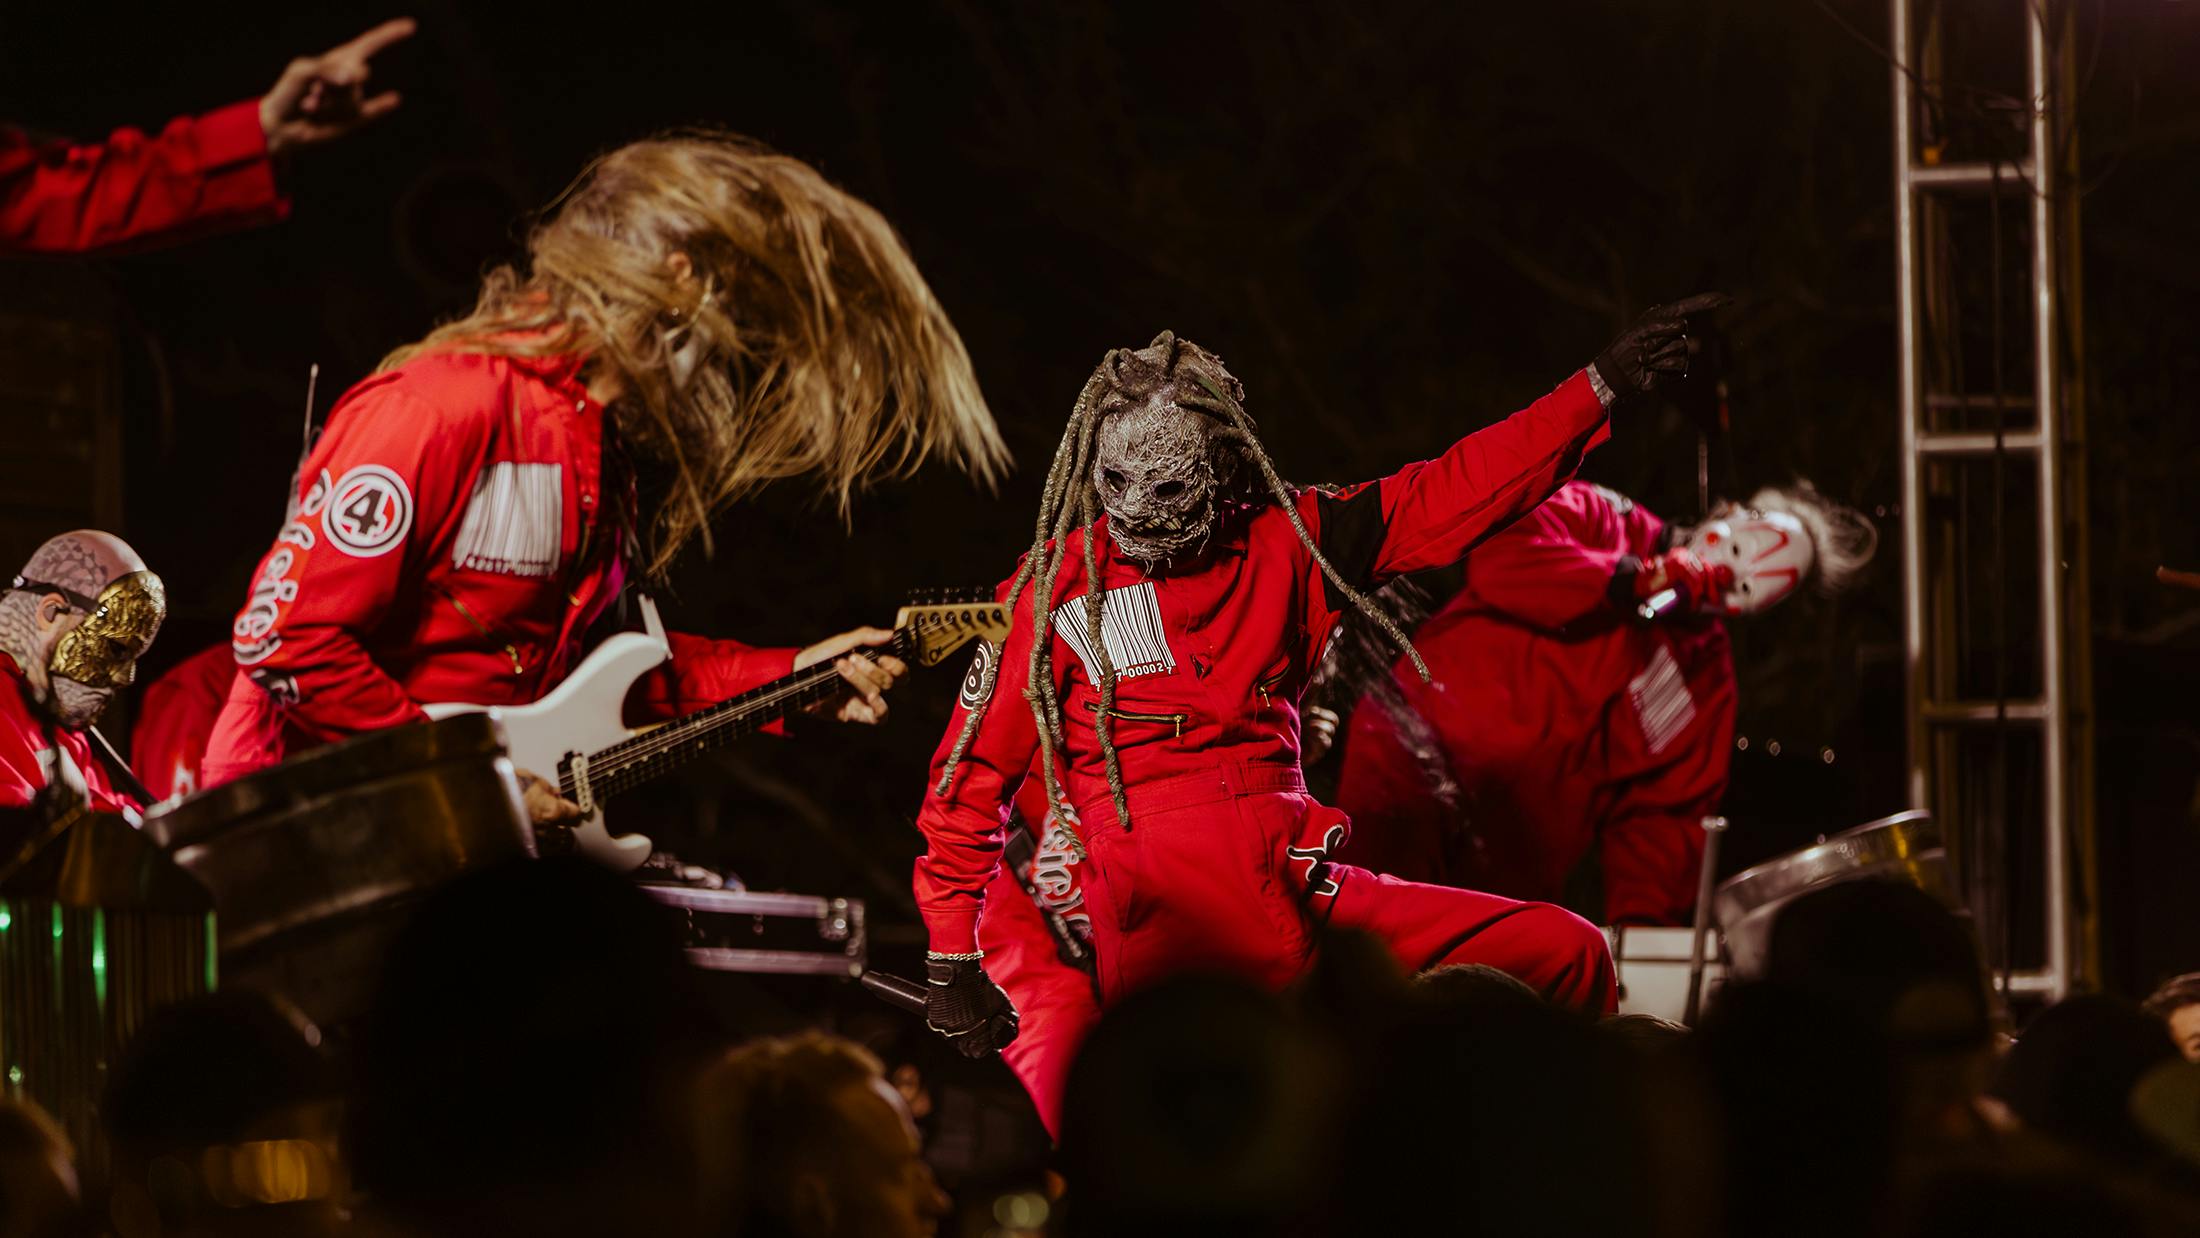 In pictures: Slipknot's tiny secret show at a bar in California